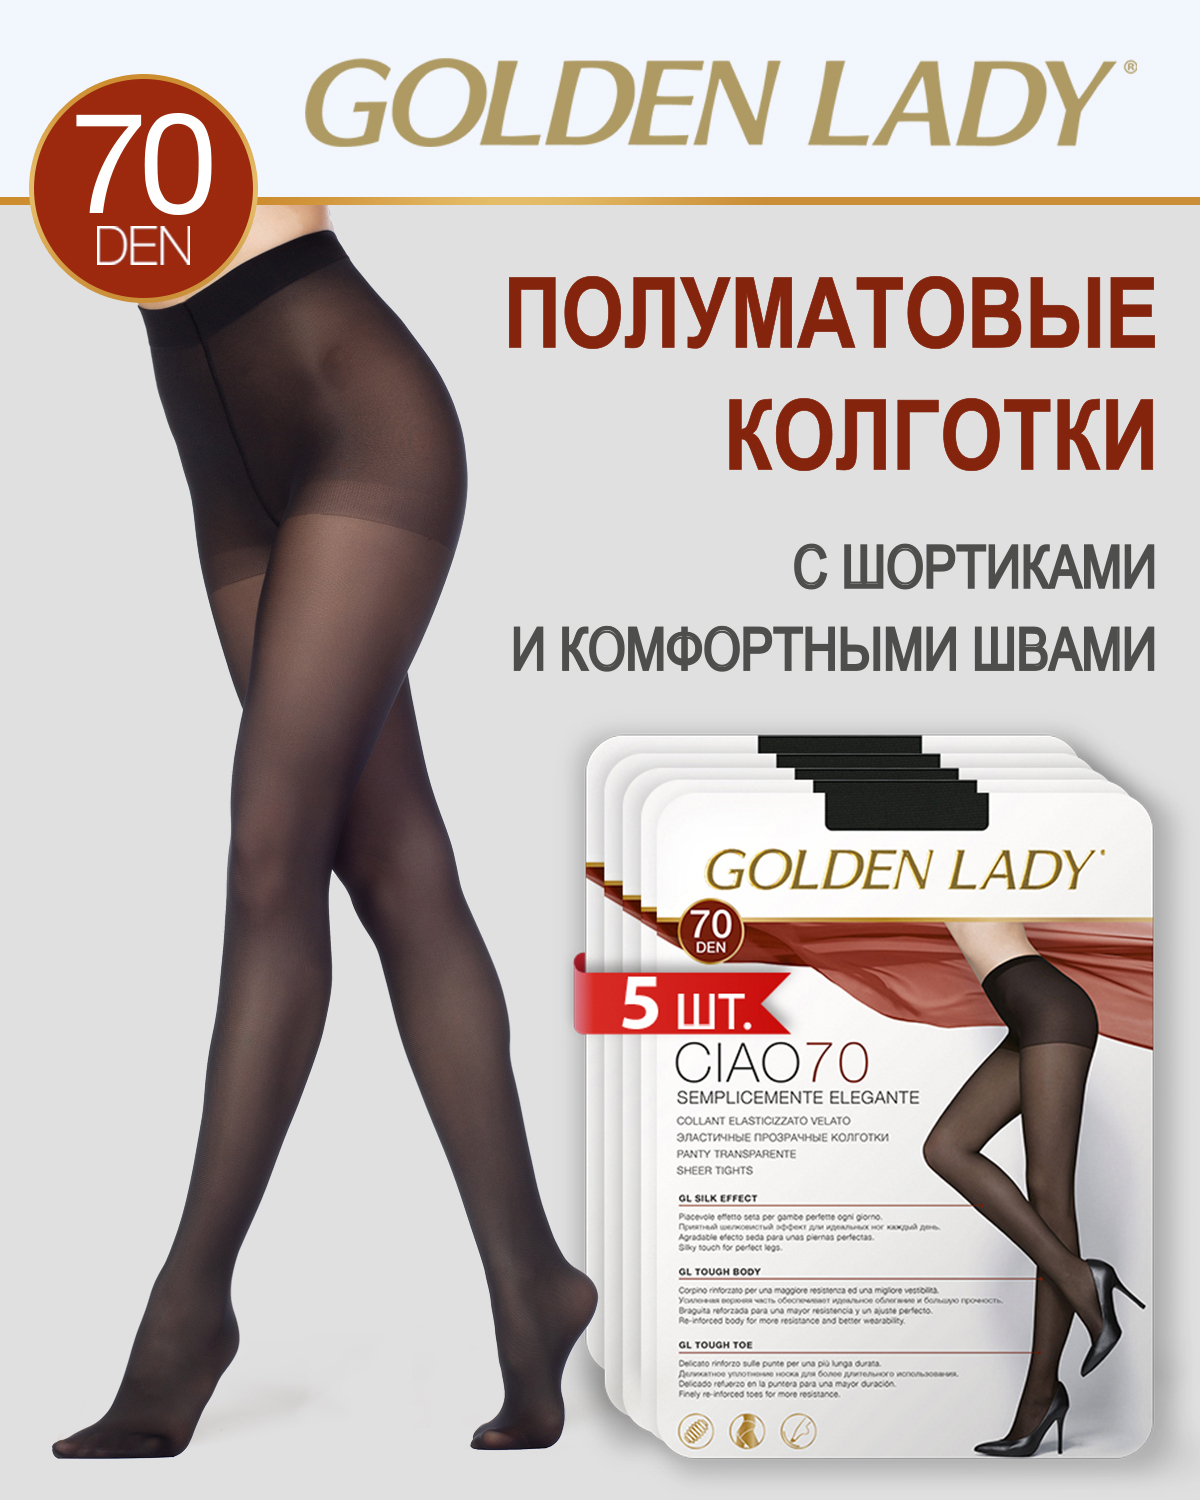 Golden Lady Ciao 70